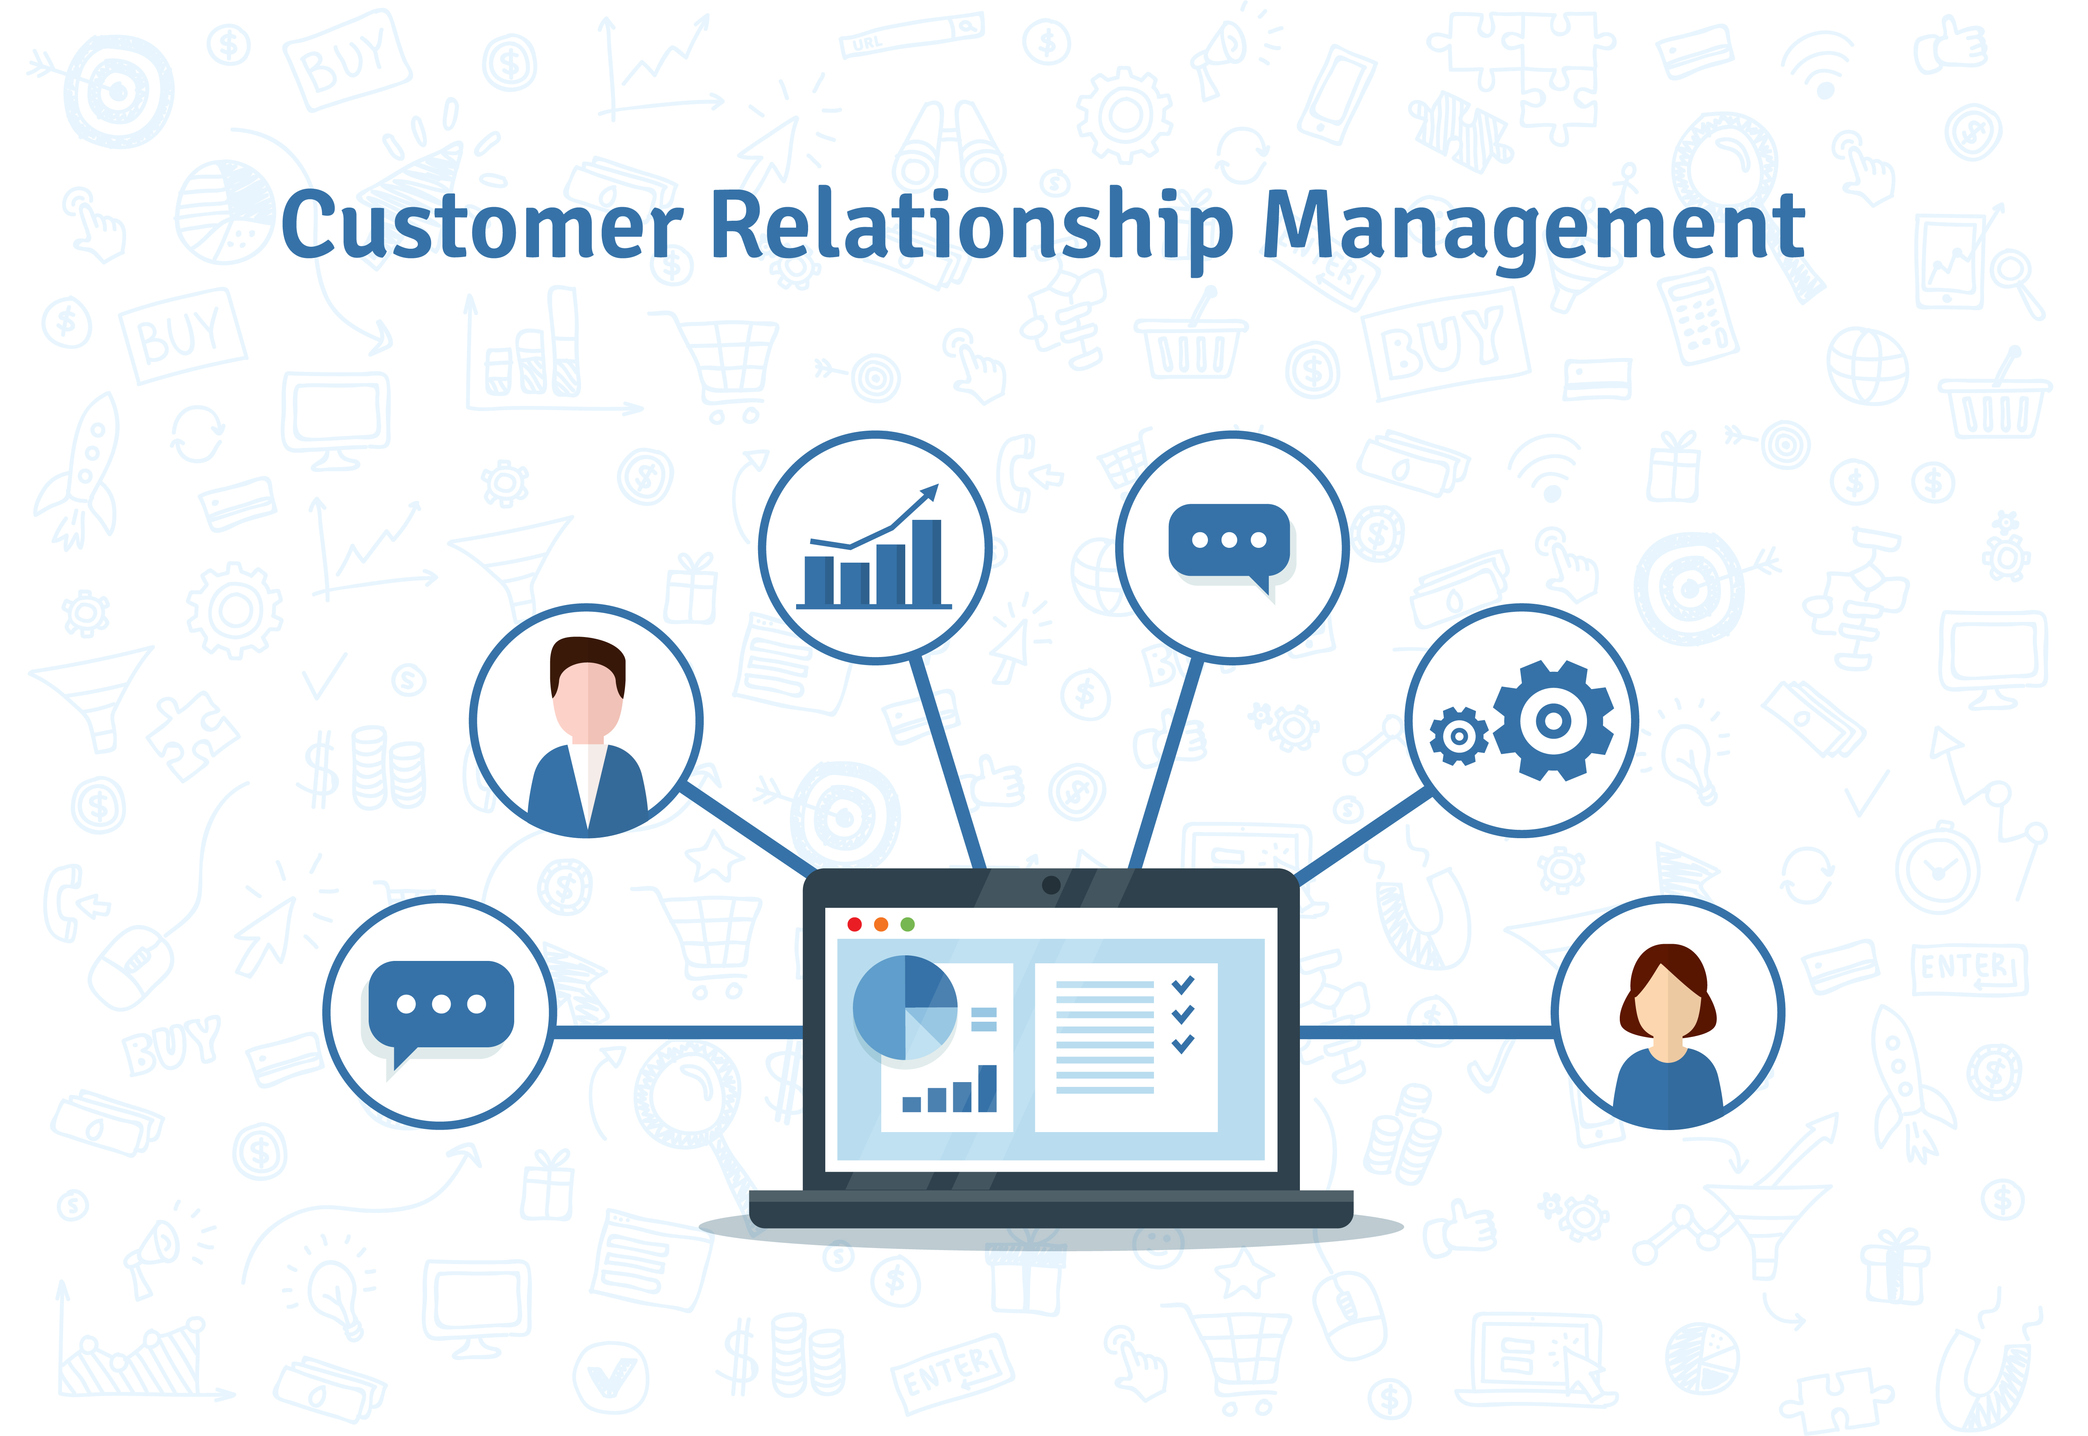 6 Features Every CRM Should Have